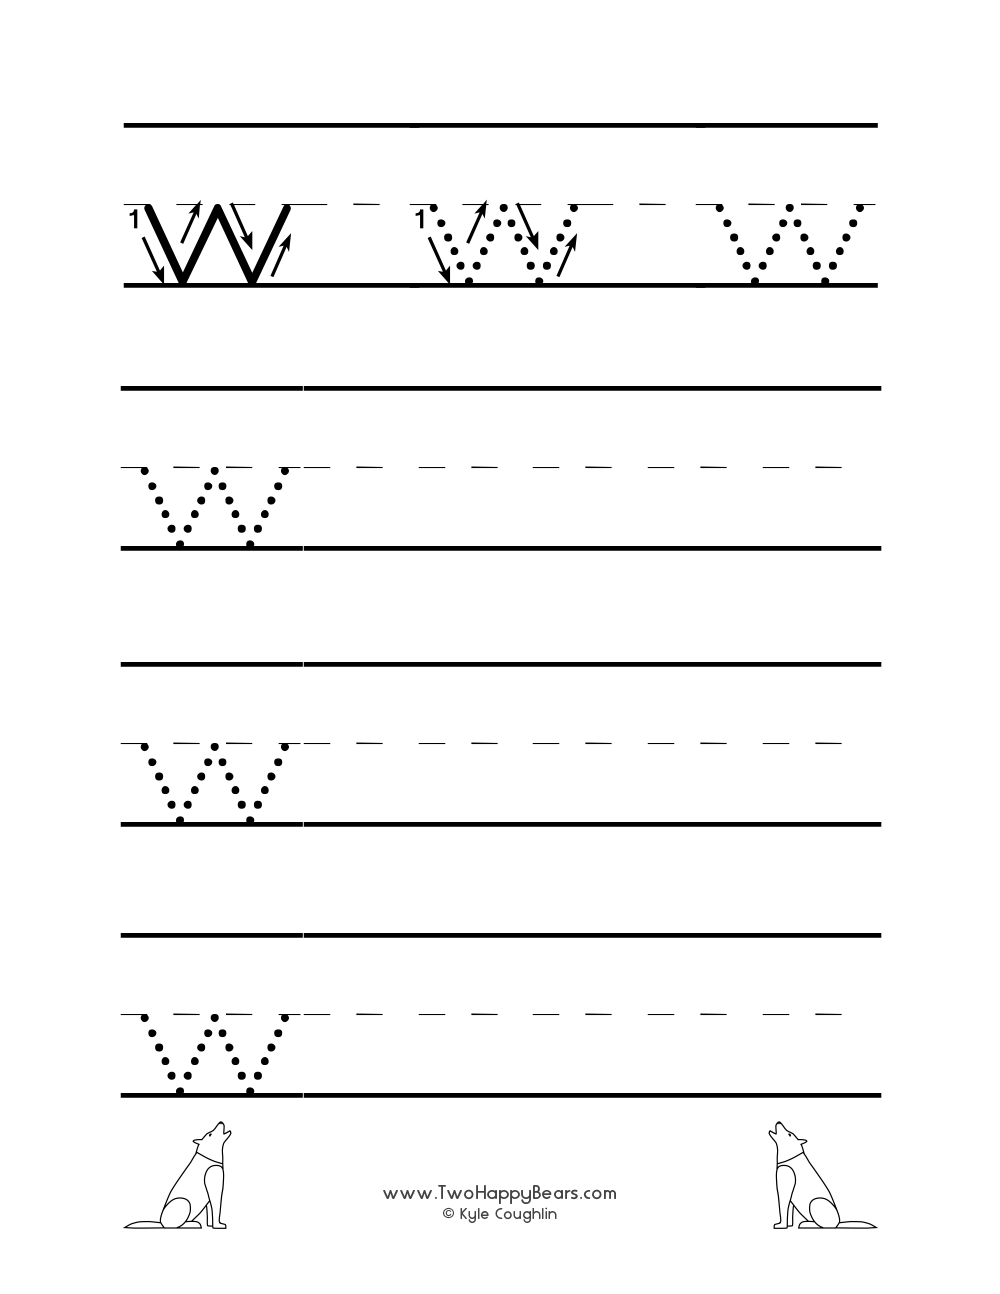 Lowercase letter W worksheet for tracing and drawing